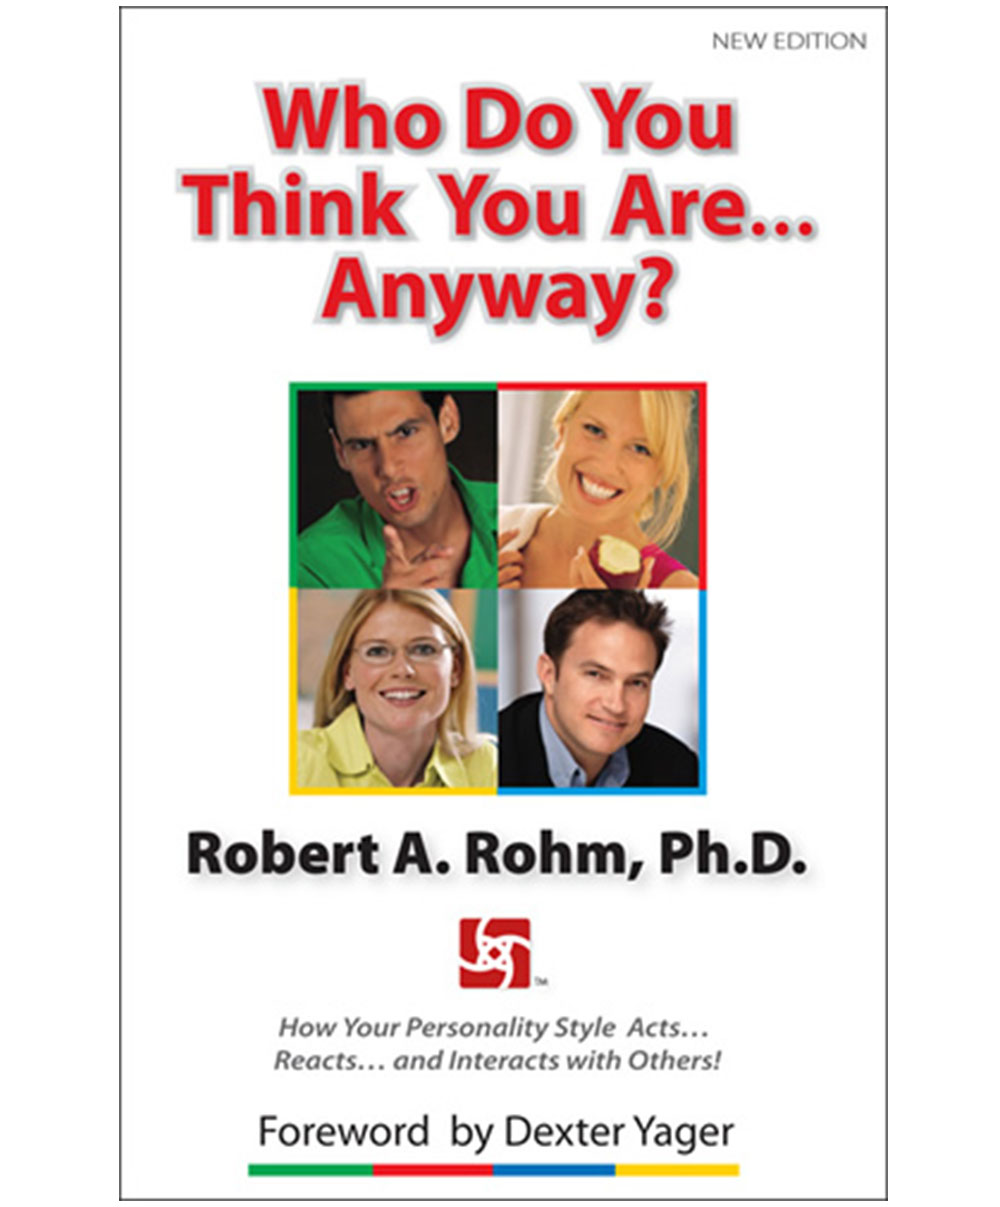 who do you think you are dr robert rohm DISC dave kauffman 1